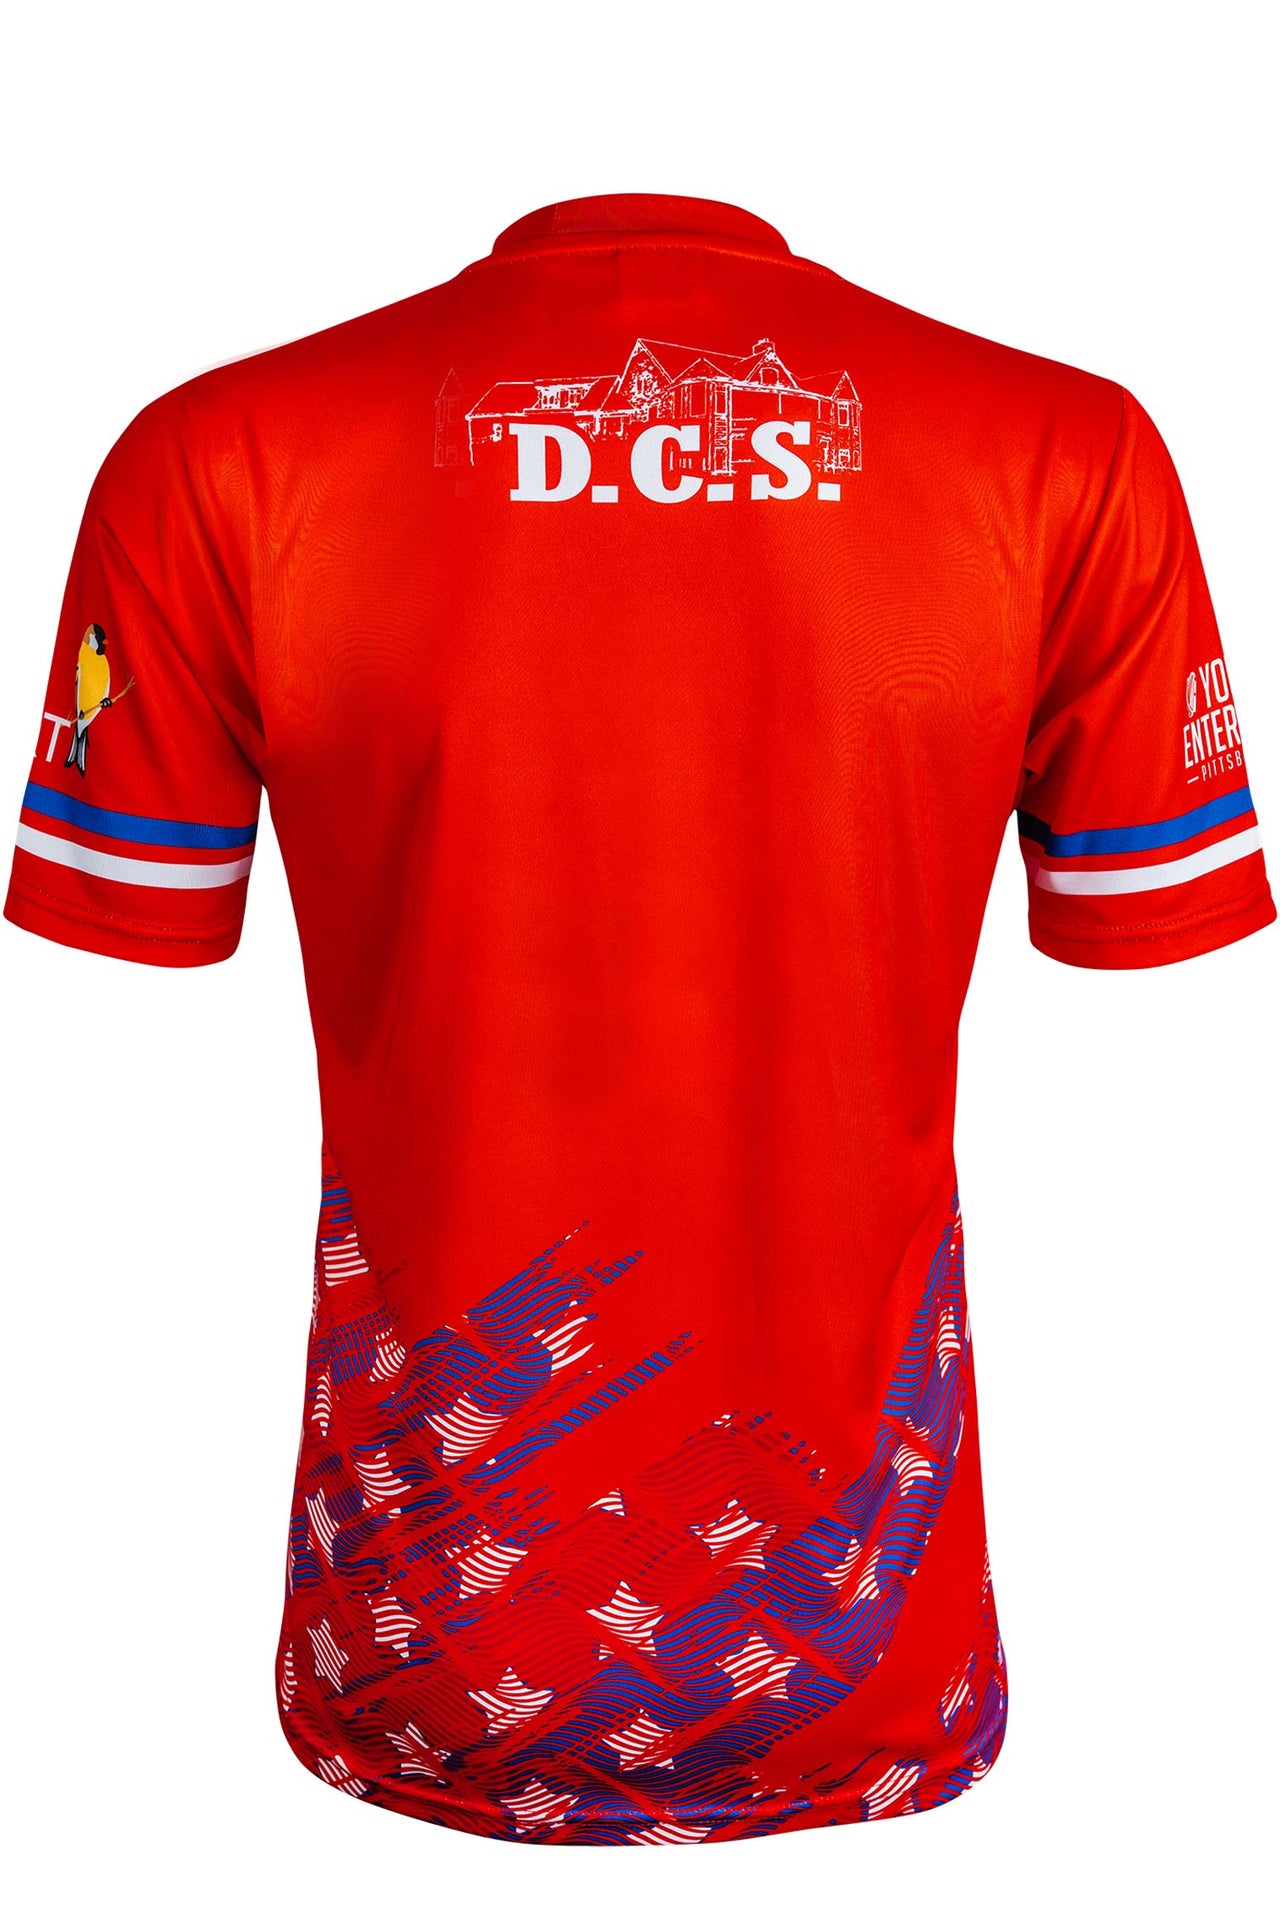 USGAA County Goalkeeper Jersey Player Fit Adult